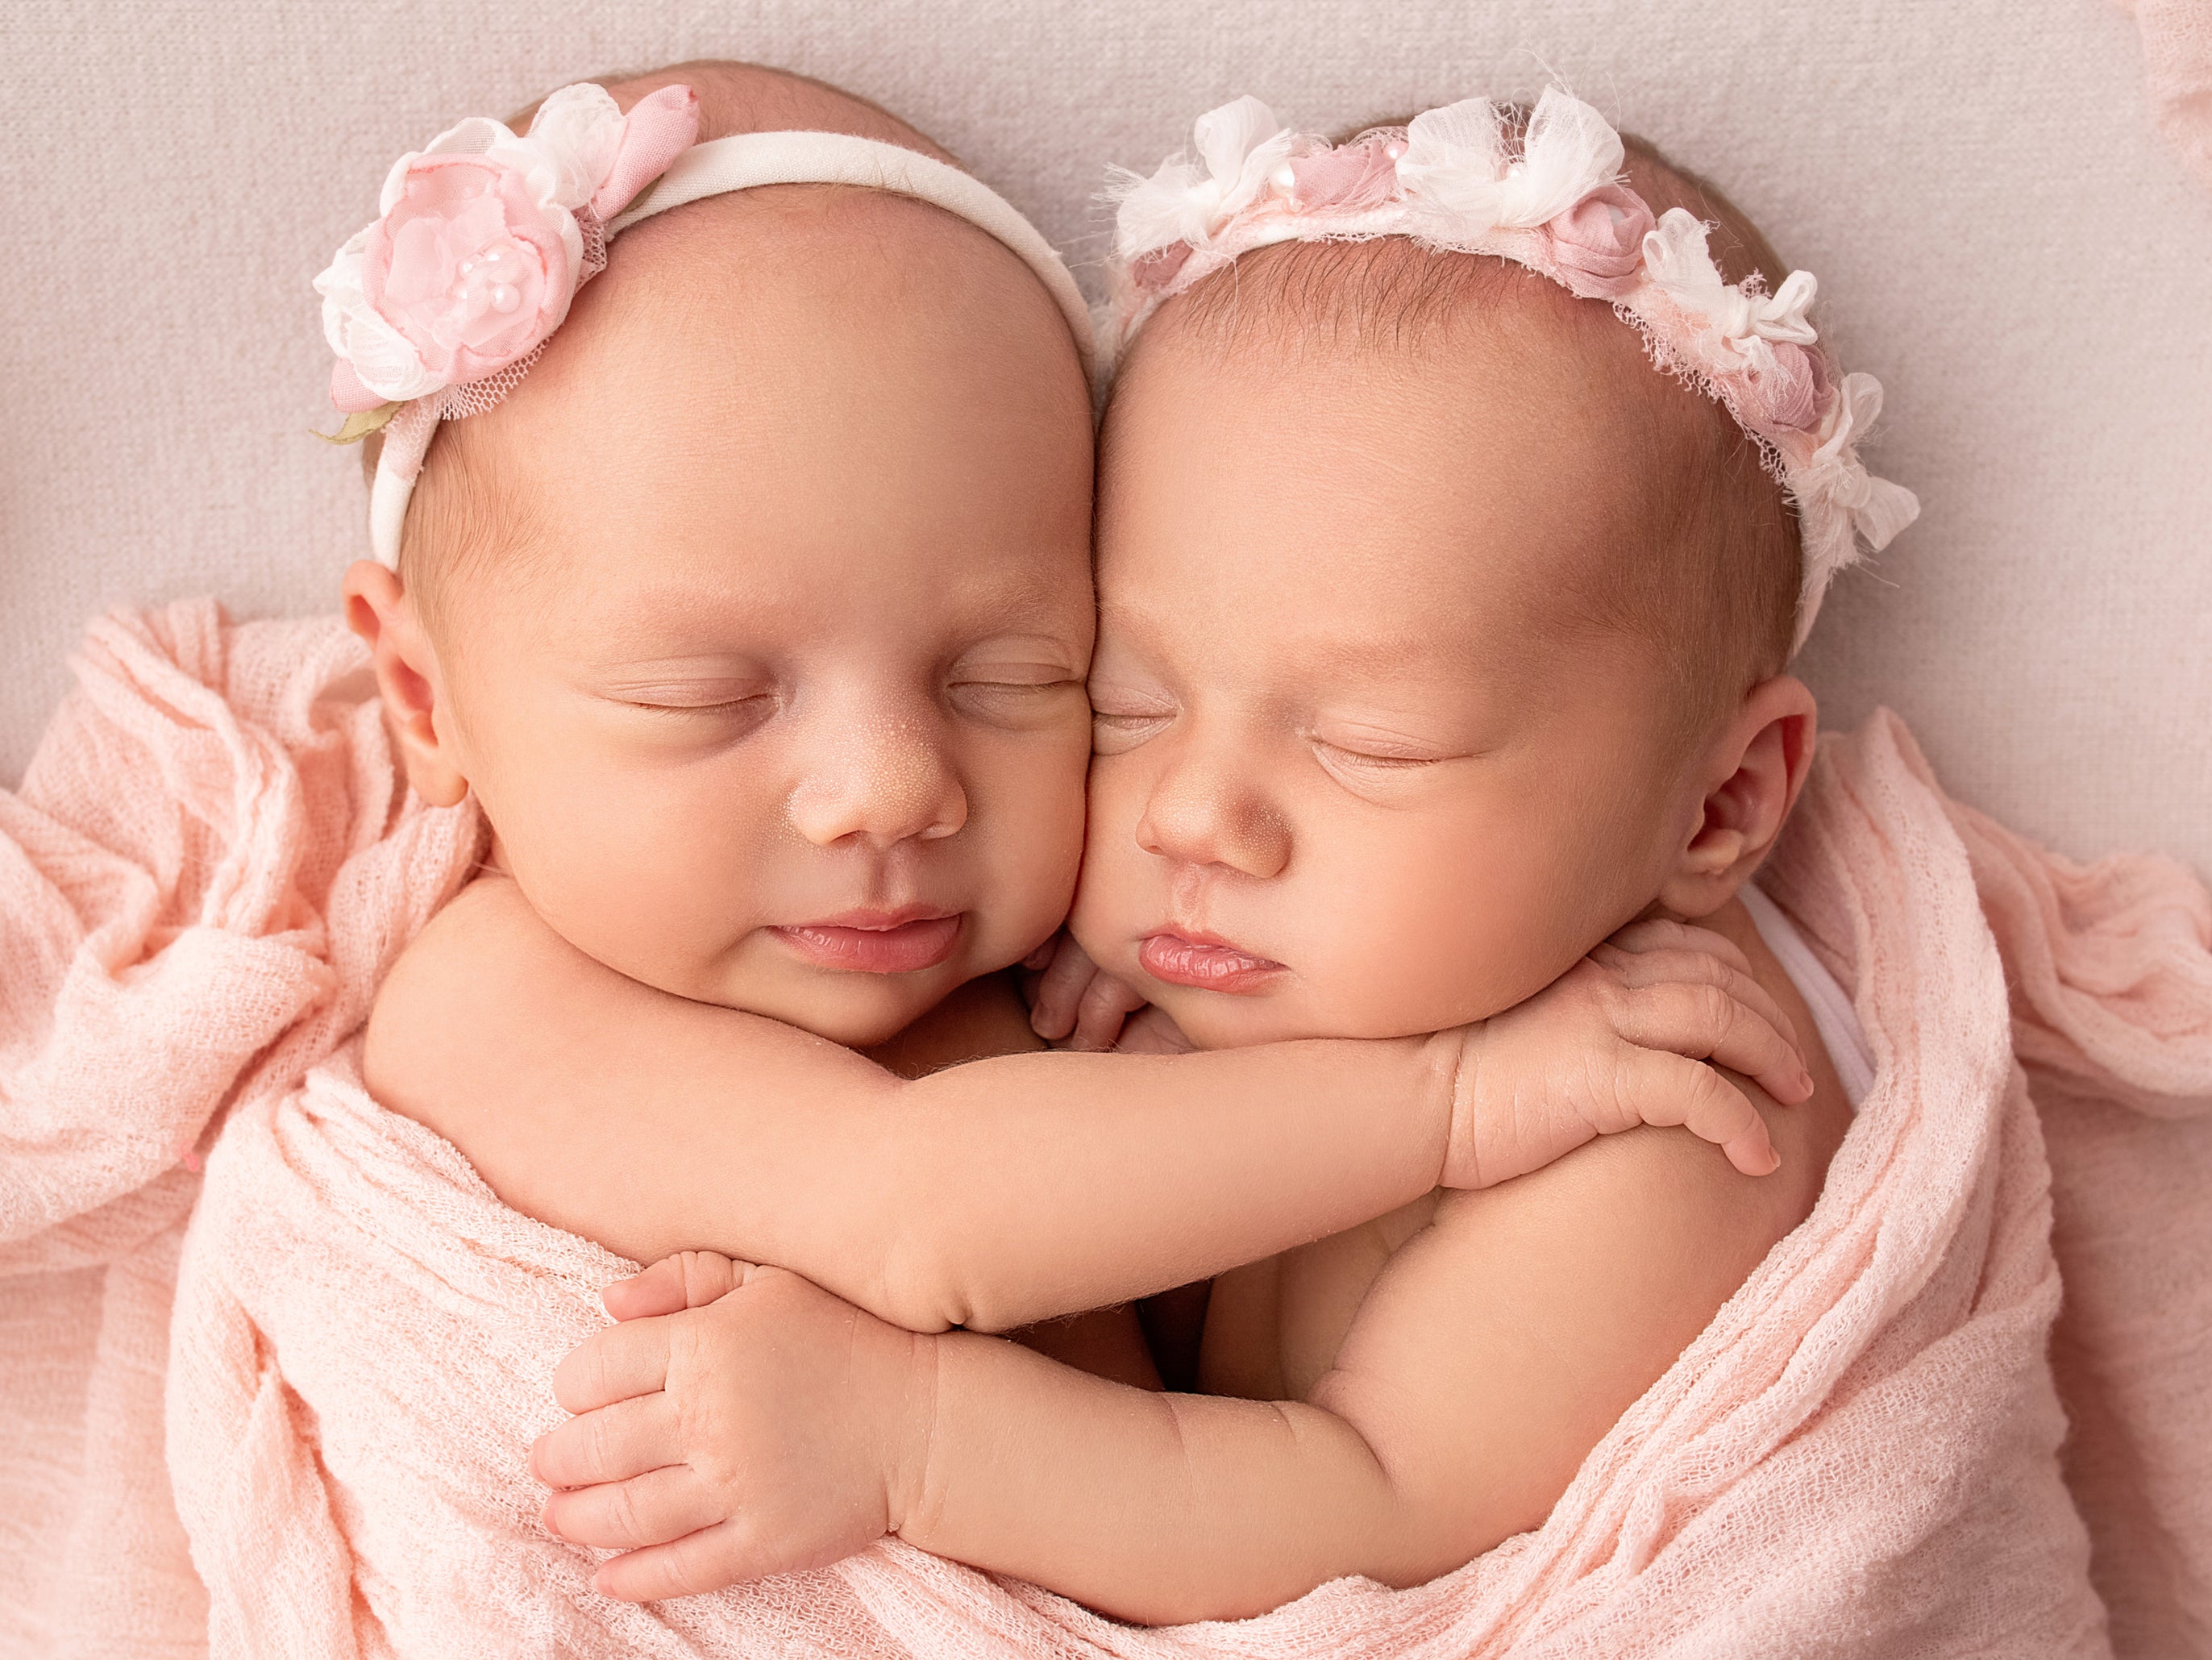 Mother reveals she isn’t sure whether the twins have been accidentally switched